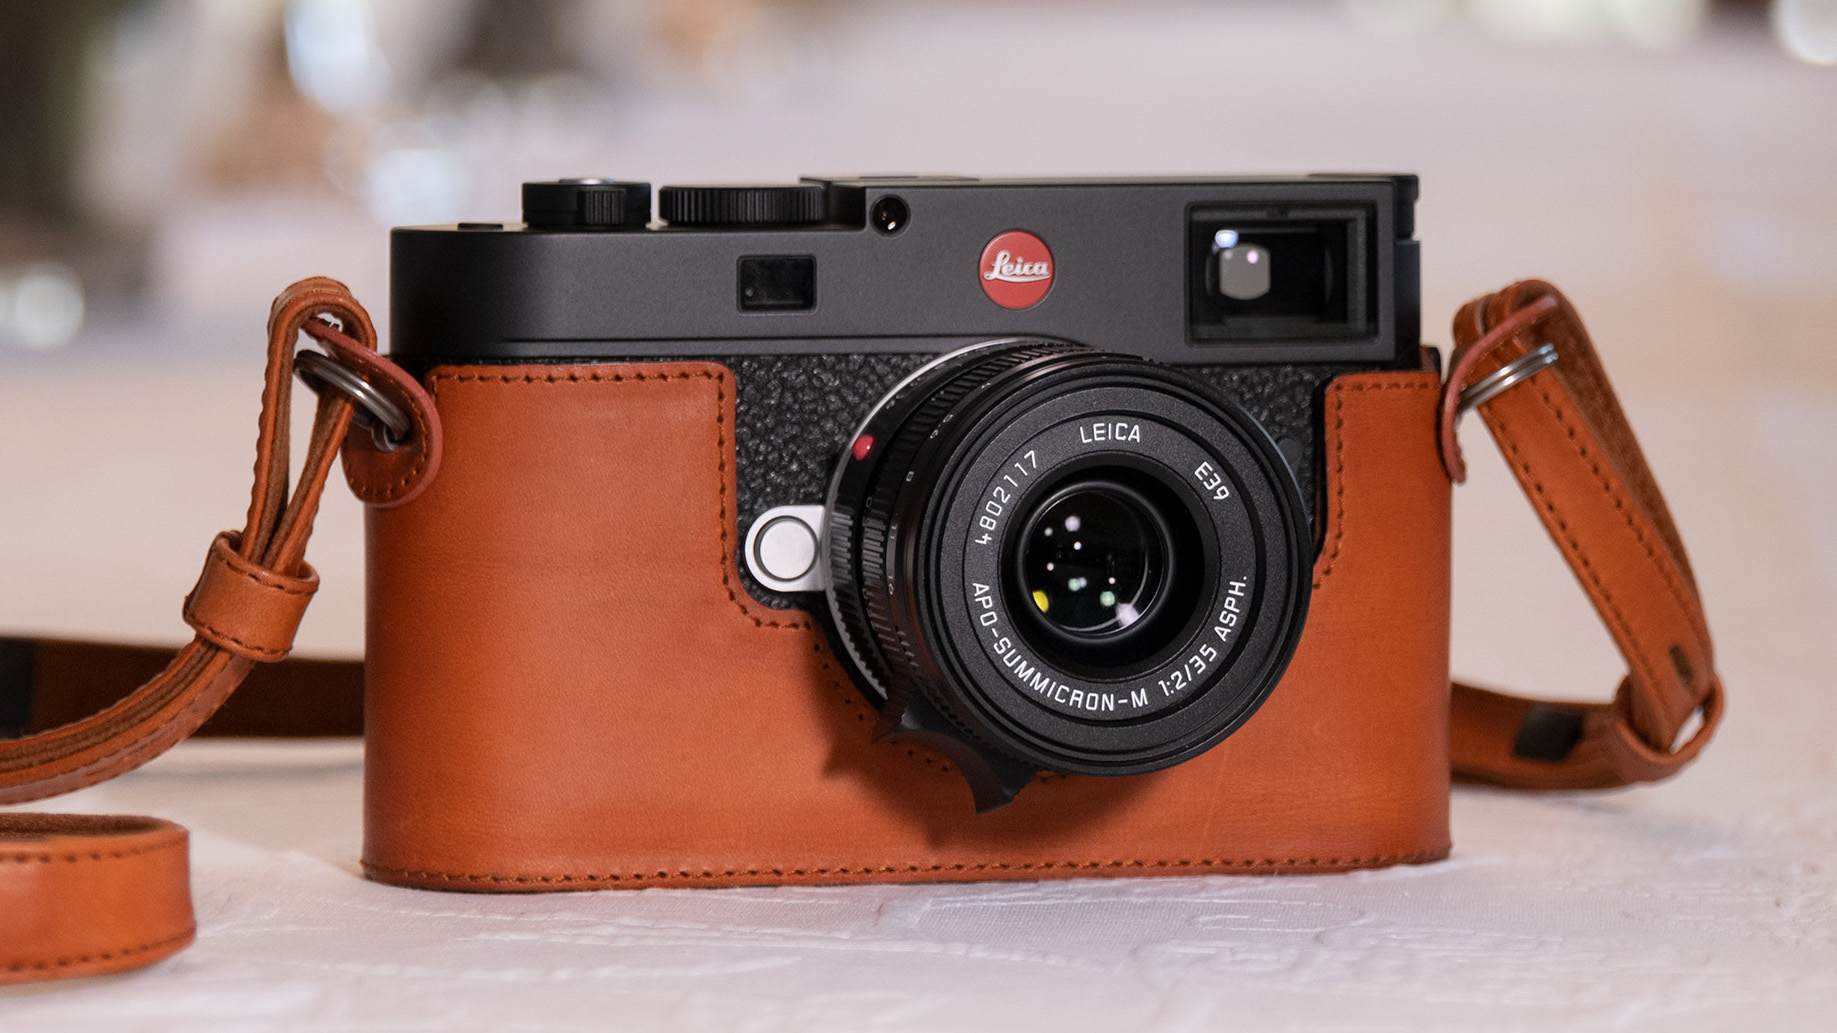 Photographer's Guide to the Leica D-Lux 4: Getting the Most from Leica's  Compact Digital Camera